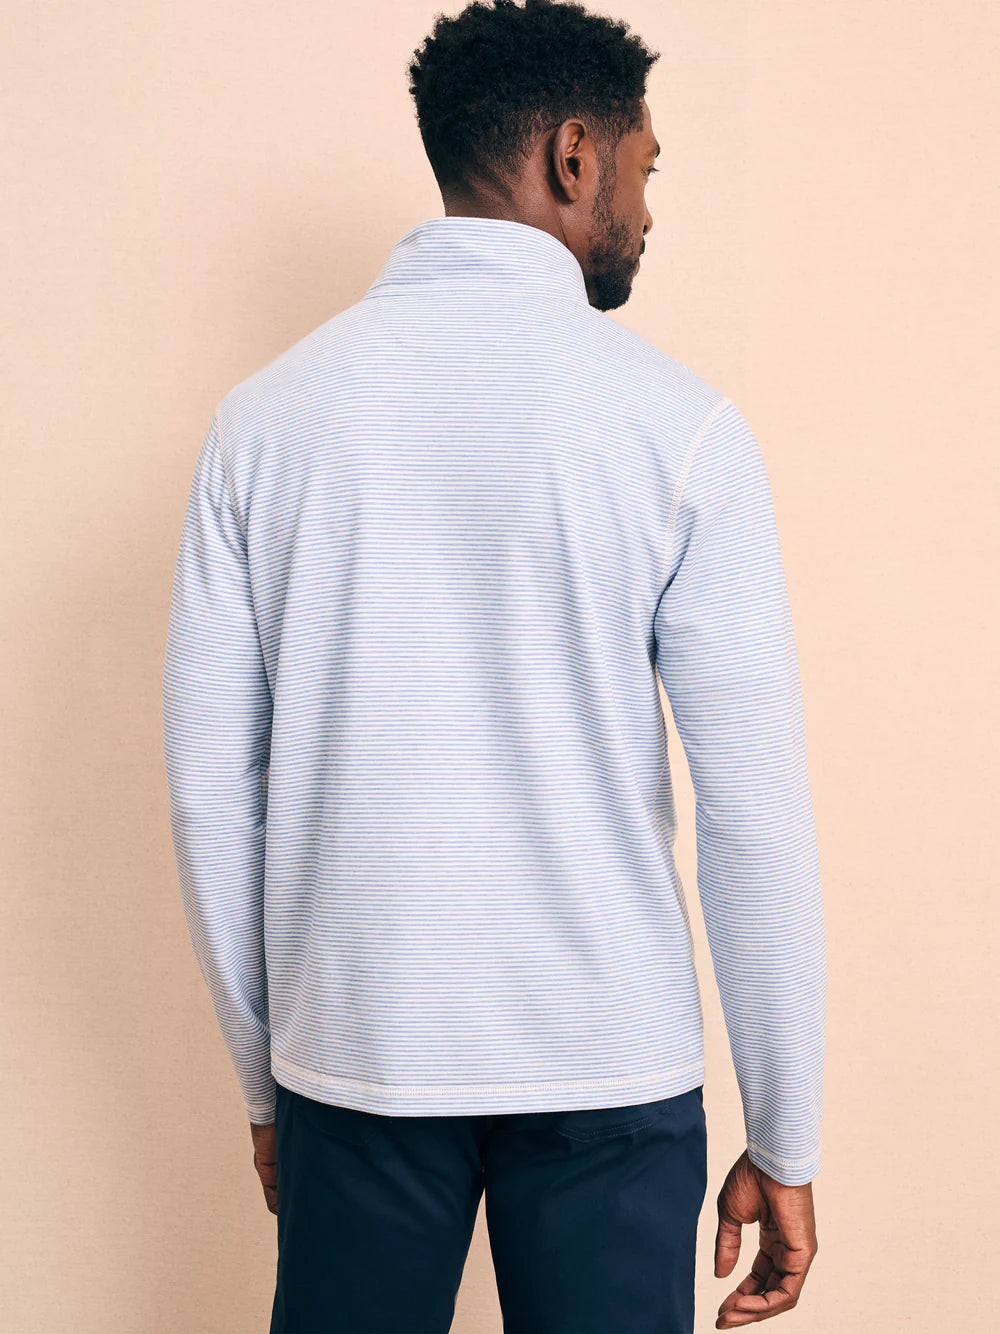 Back view of man wearing a striped quarter zip pullover by Faherty